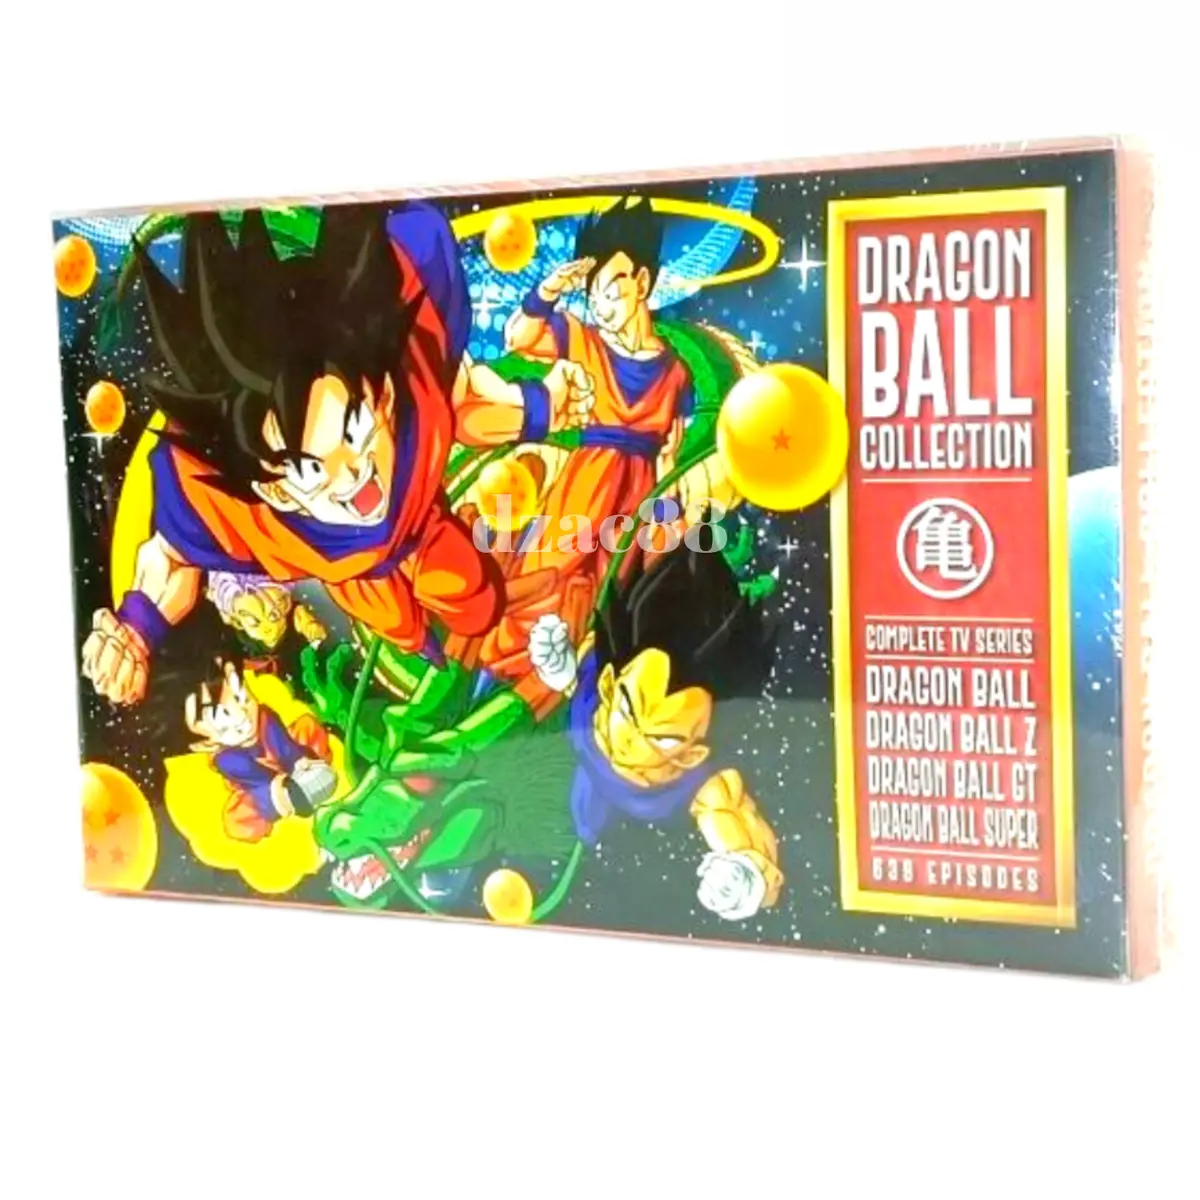 anand vaghela add dragon ball z full episodes dubbed photo